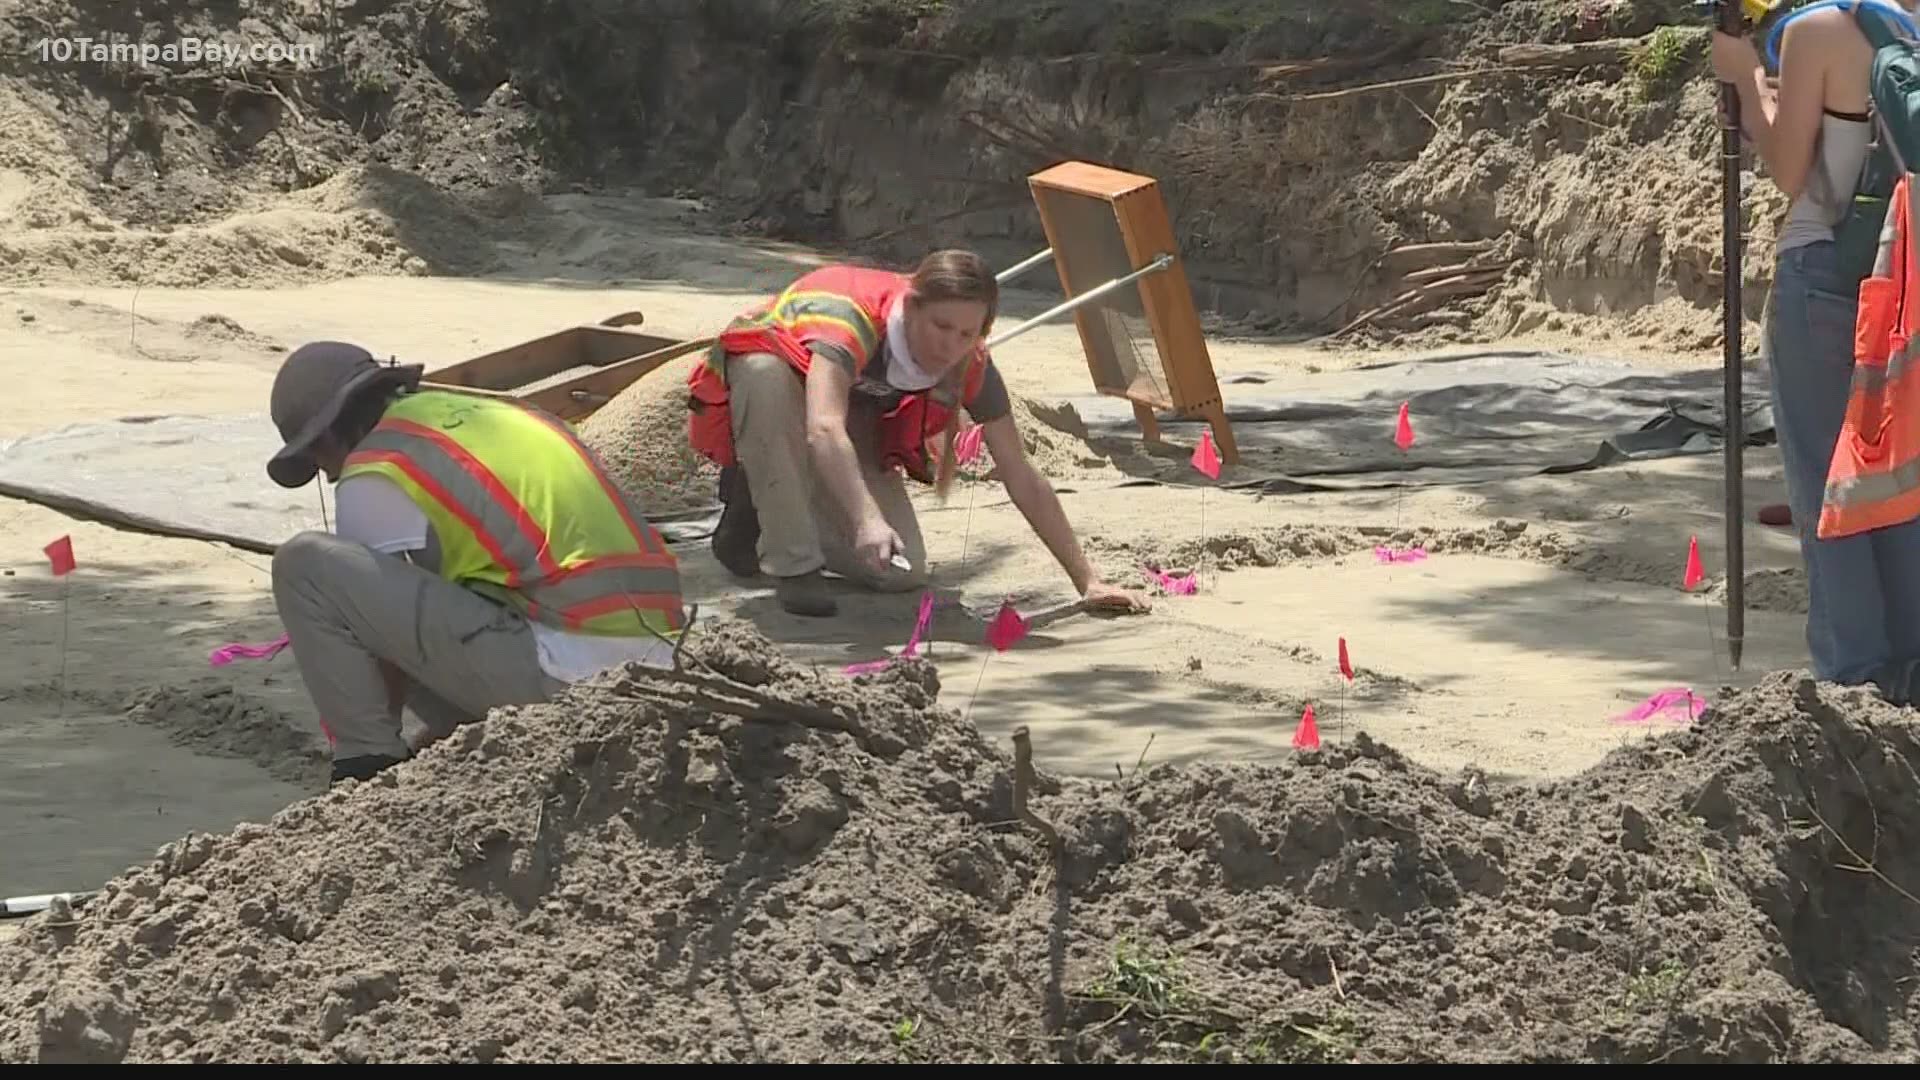 “At least 800 bodies unaccounted for from the cemetery...formerly known as Catholic/St. Mary's," said Ray Reed. The Diocese of St. Petersburg says graves were moved.